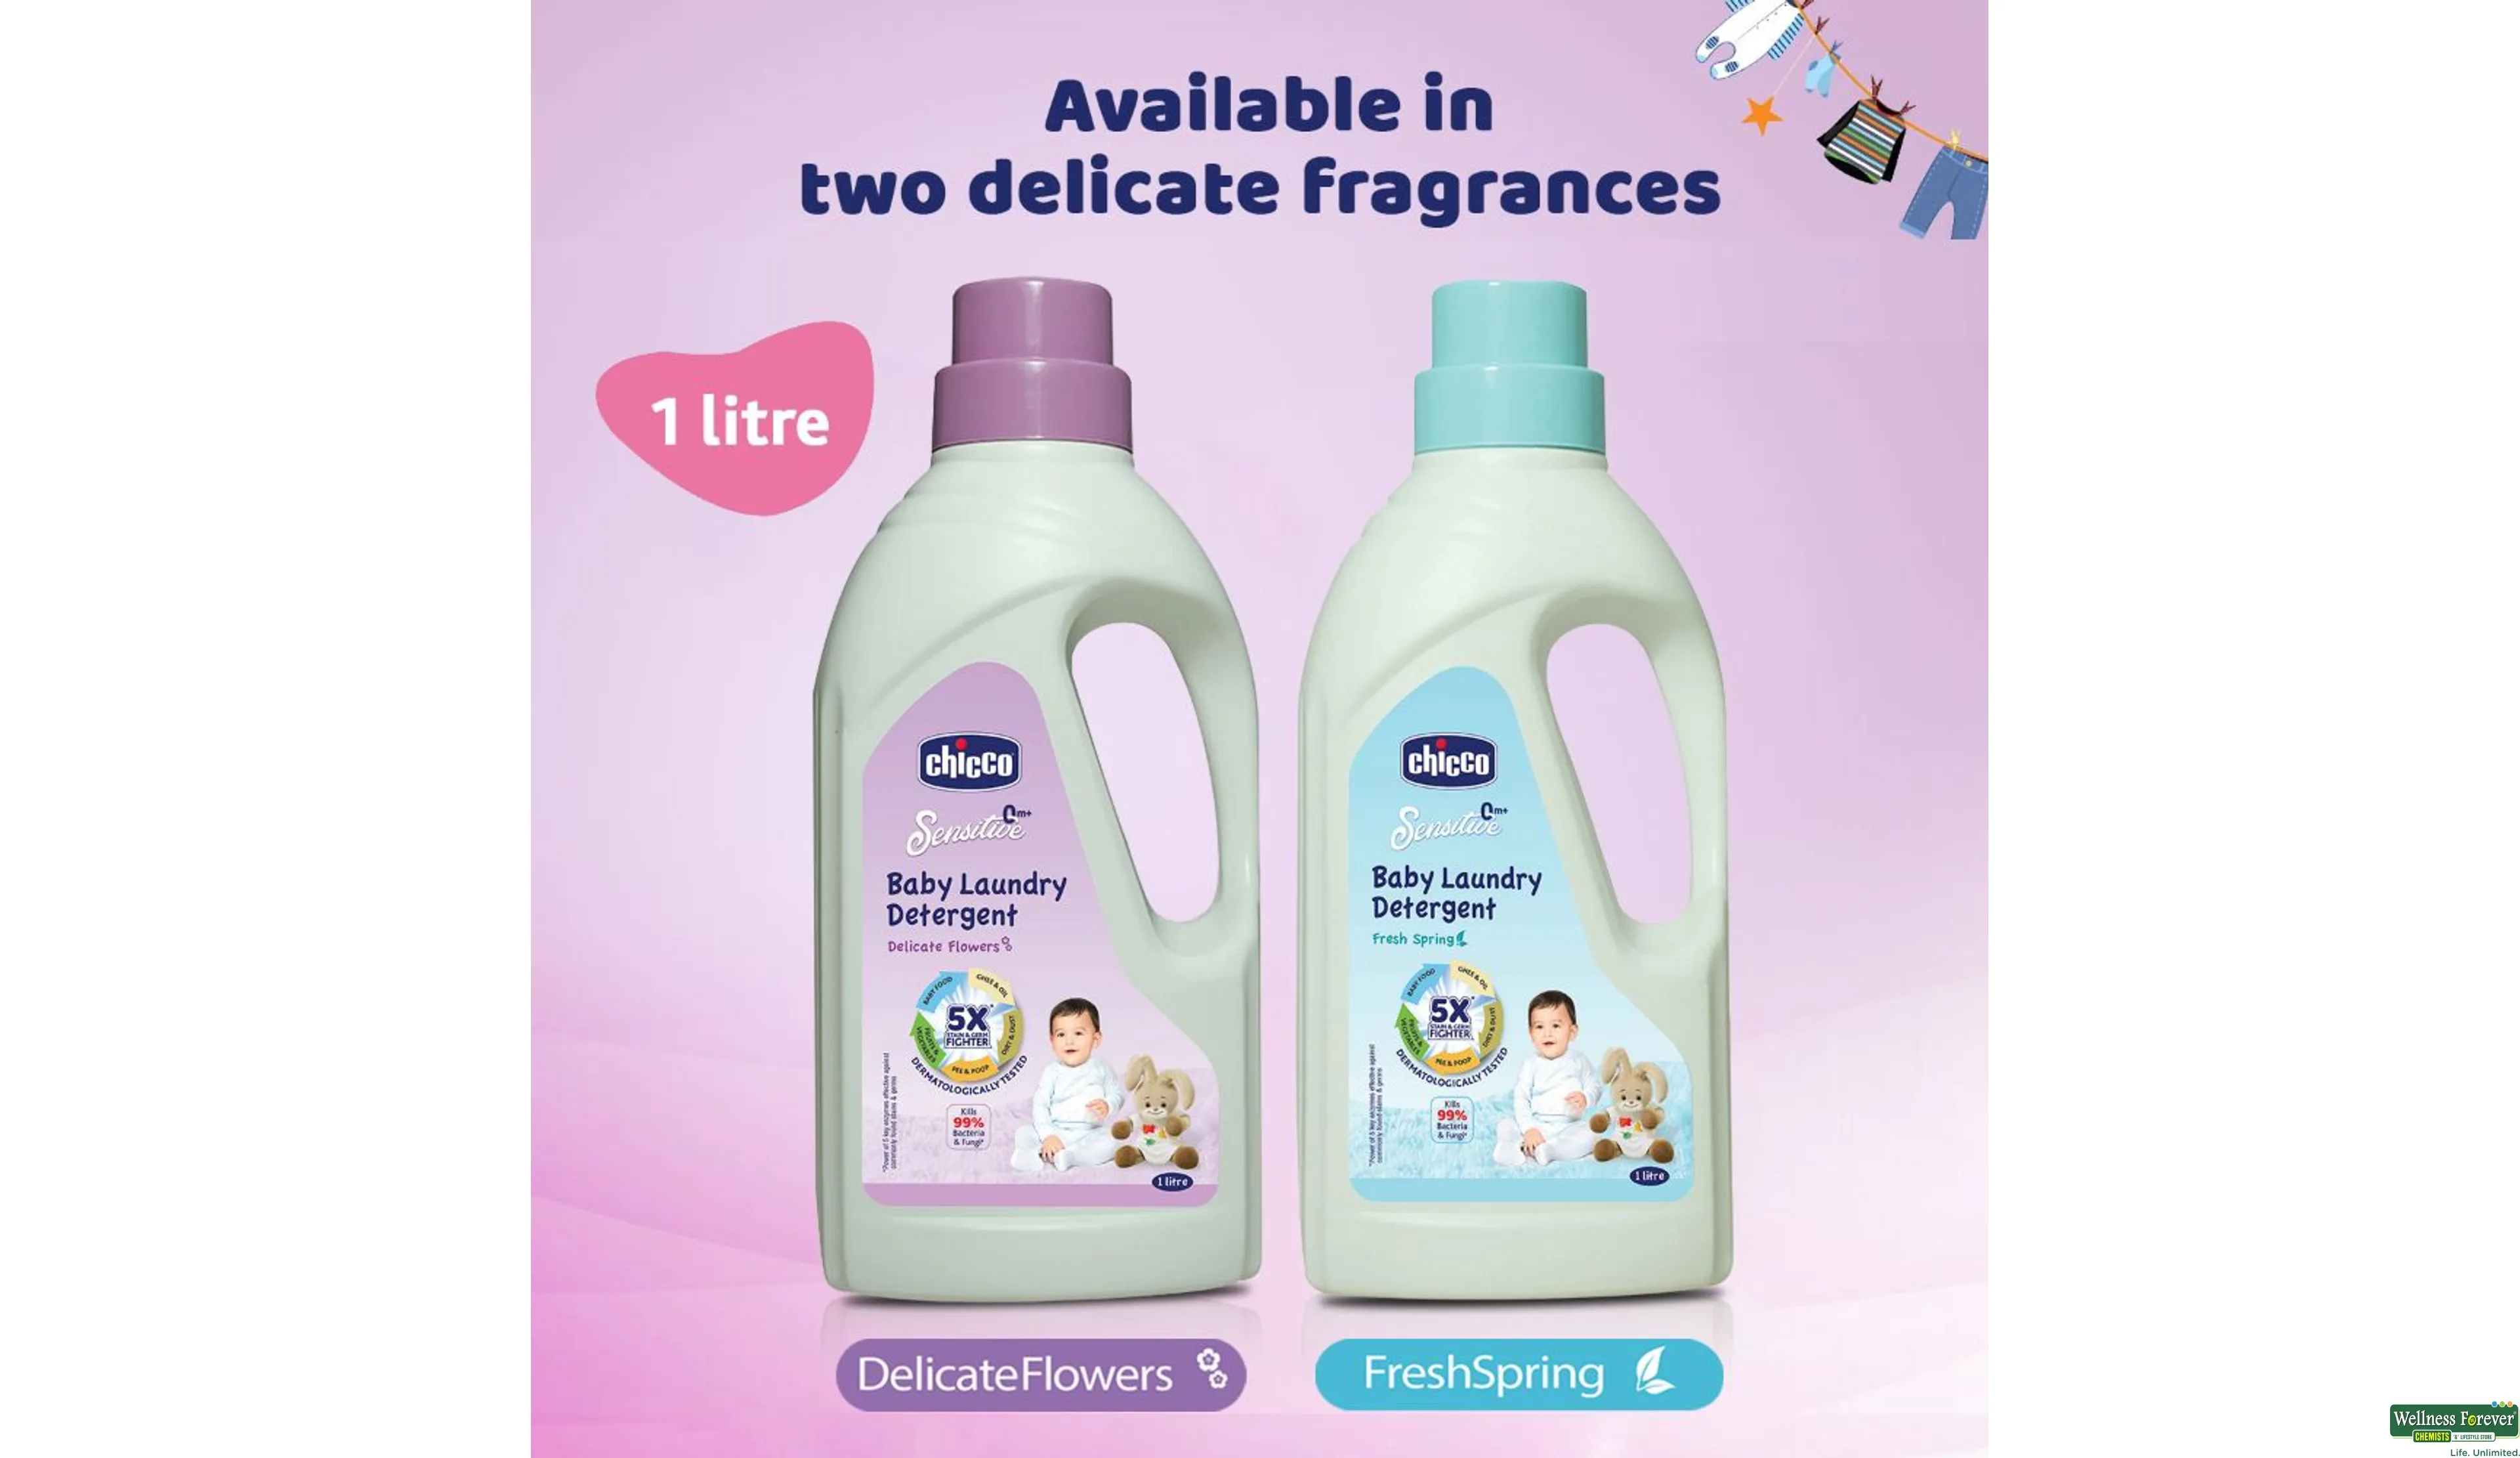 Chicco Baby Laundry Detergent Delicate Flowers (1 L)